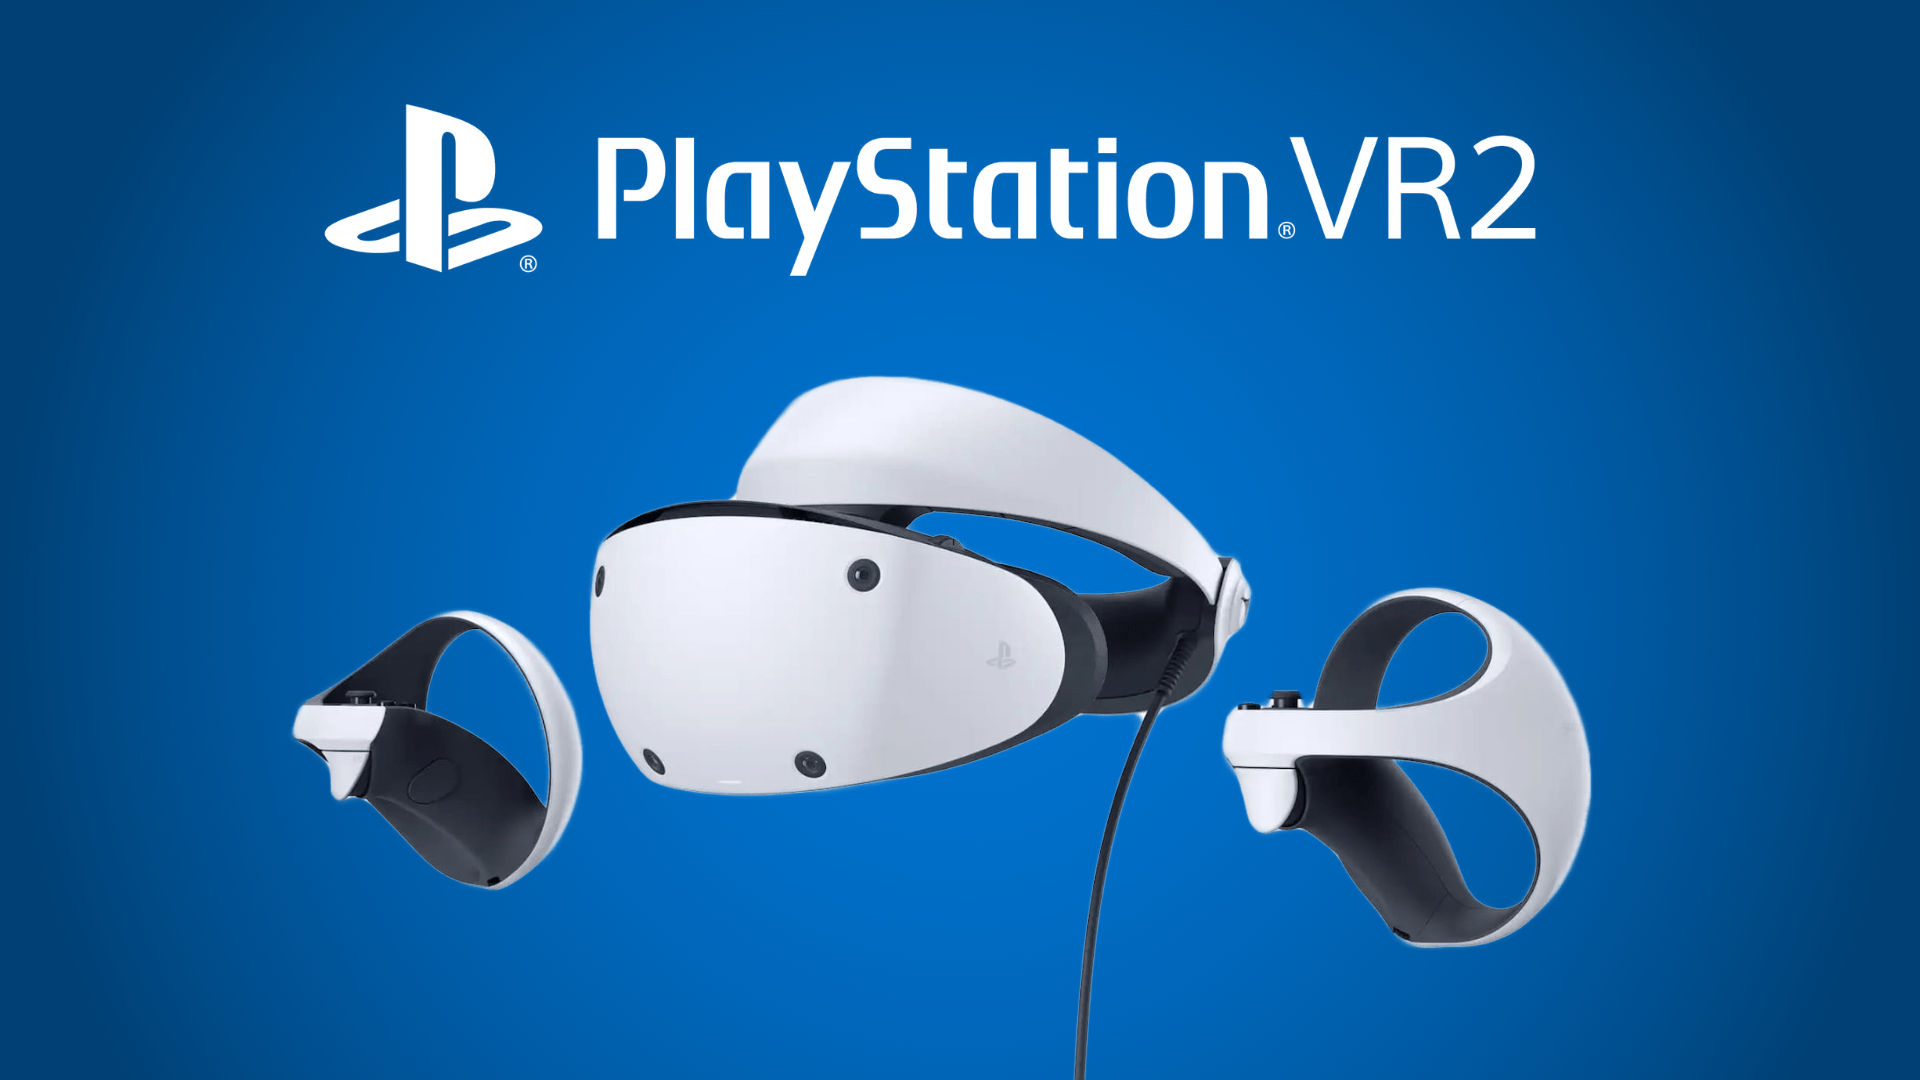 PlayStation VR2 pre-orders officially start today